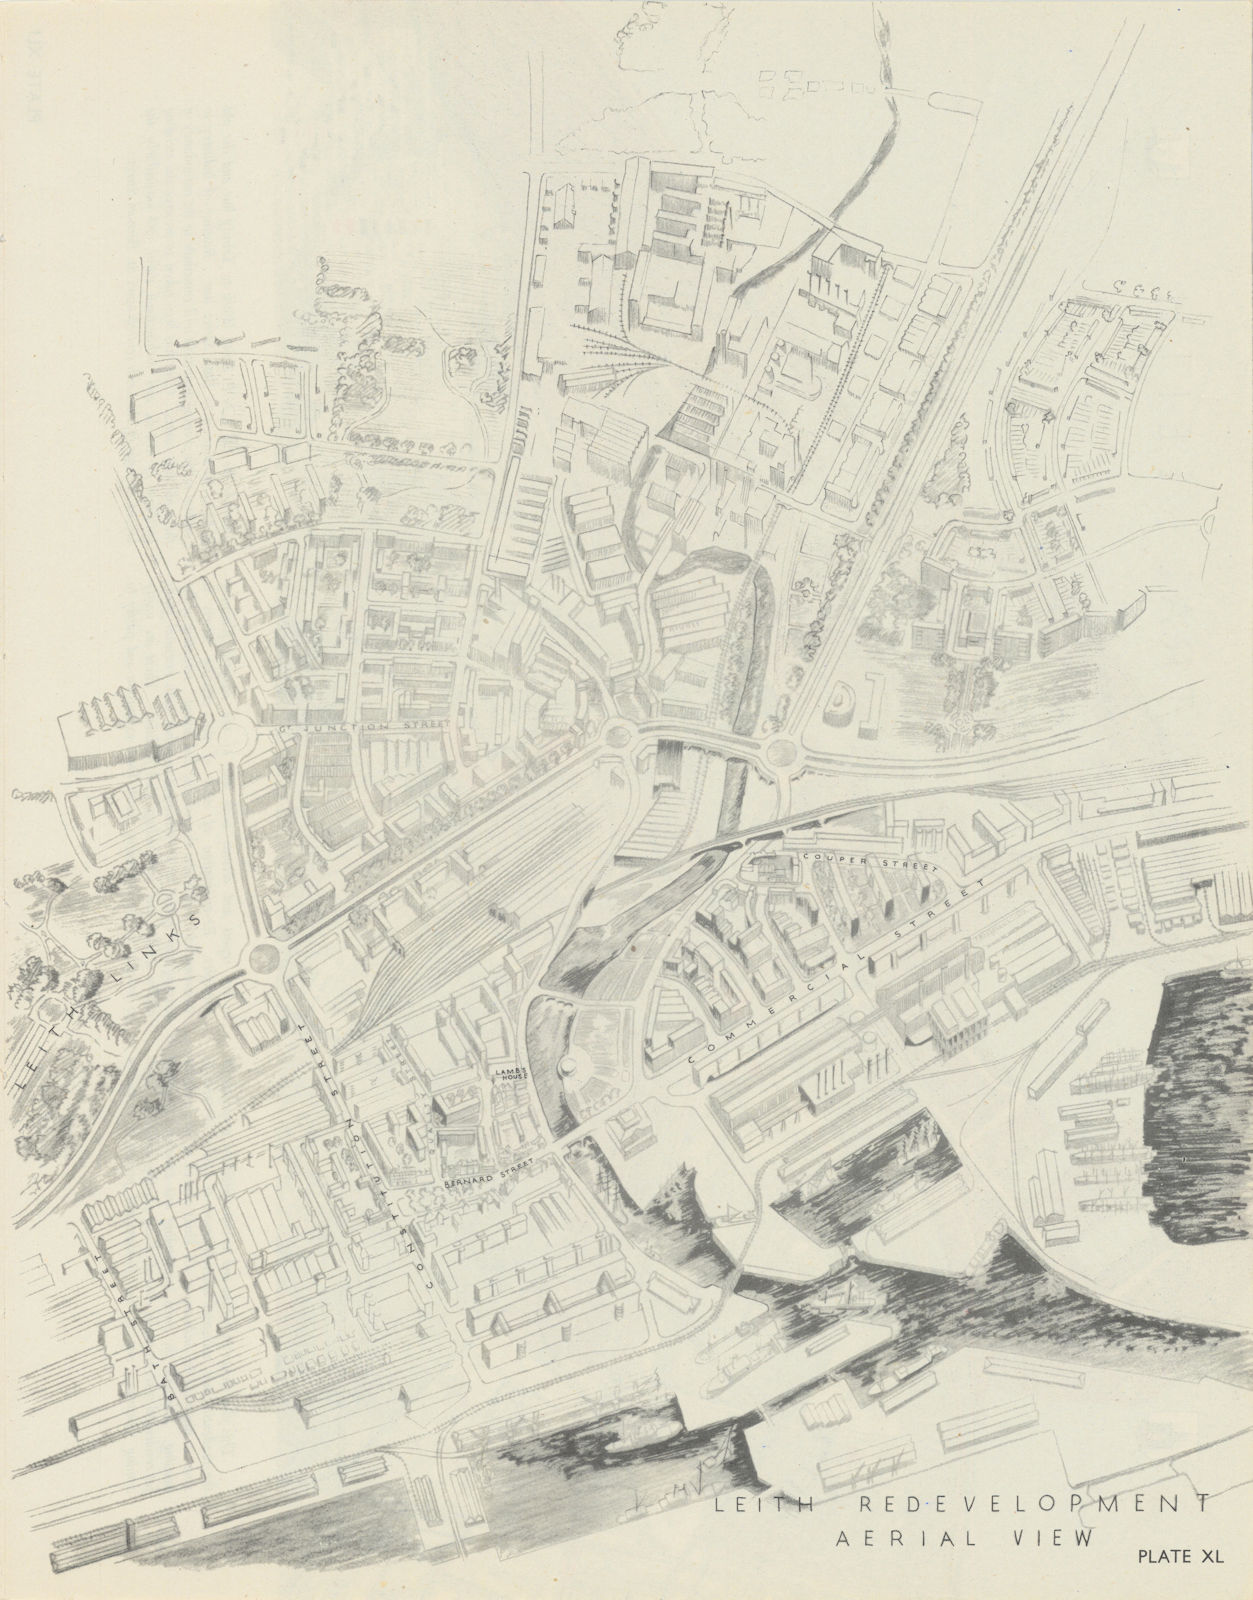 Associate Product EDINBURGH. Leith Redevelopment proposal aerial view. ABERCROMBIE 1949 old map